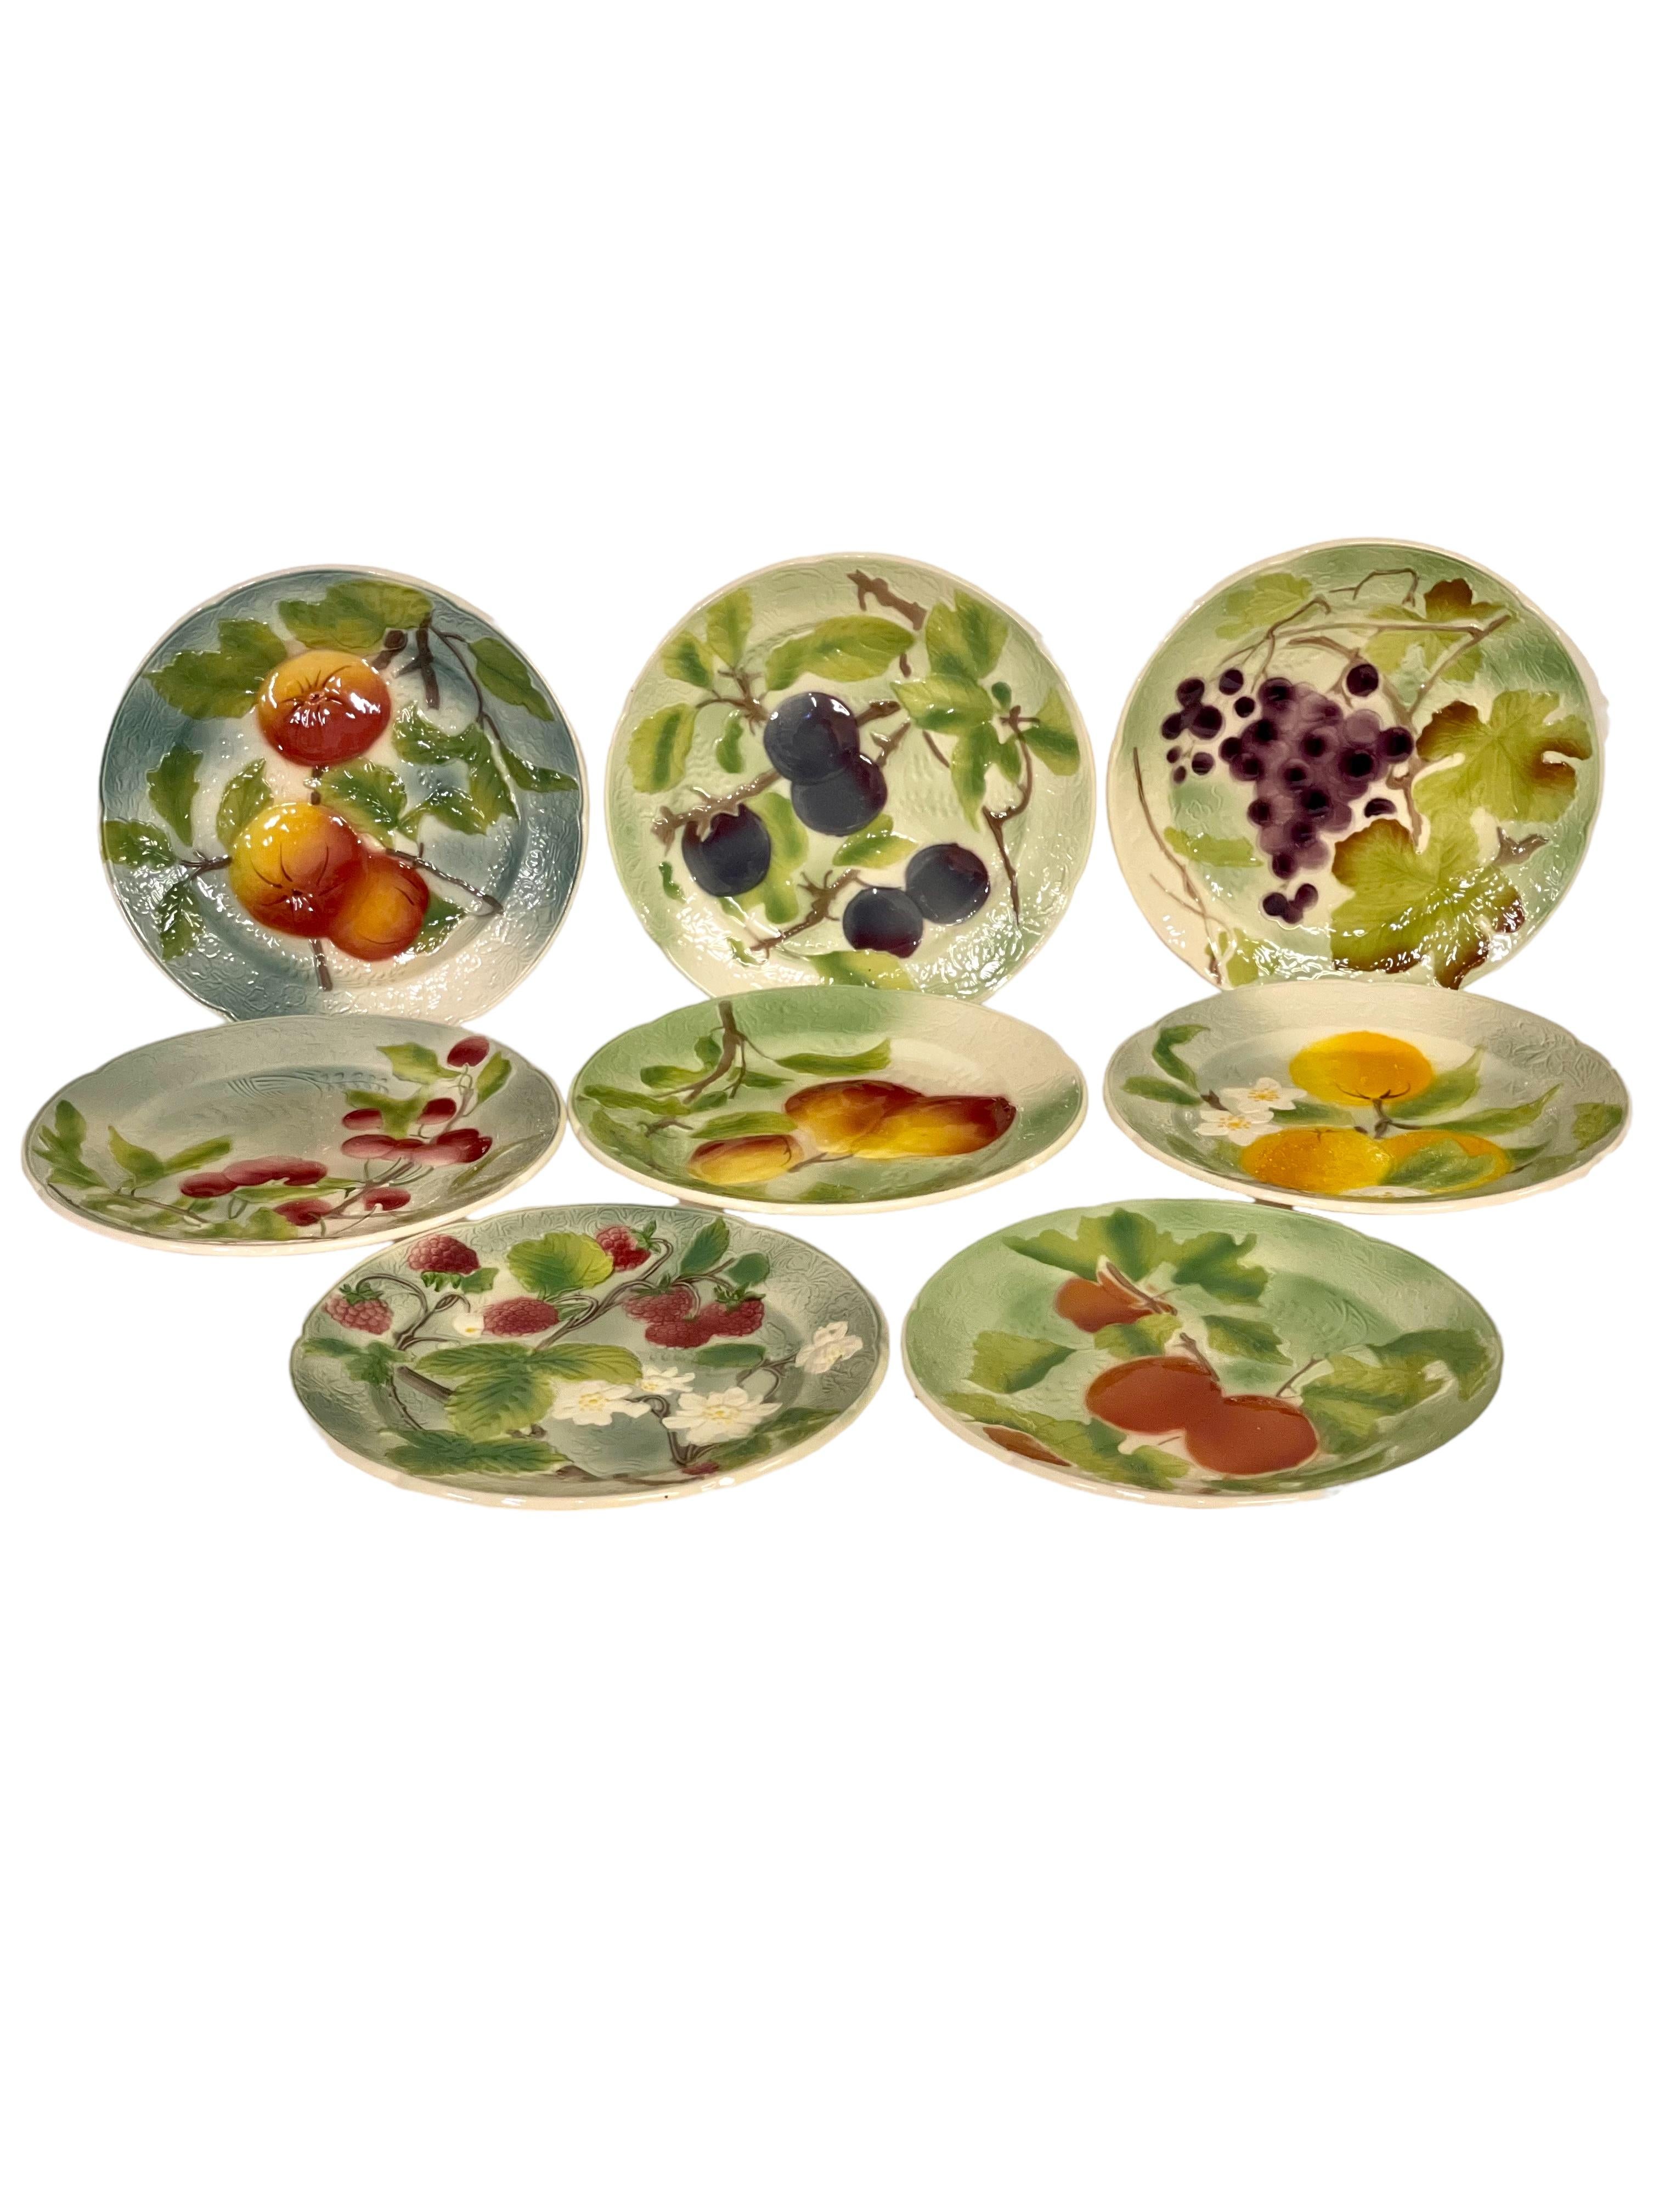 A highly collectible set of eight Majolica fruit plates by the renowned French earthenware manufacturer Saint-Clément, founded by Jacques Chambrette in 1758 and a favoured supplier for Marie-Antoinette. Majolica is made by shaping and firing a piece